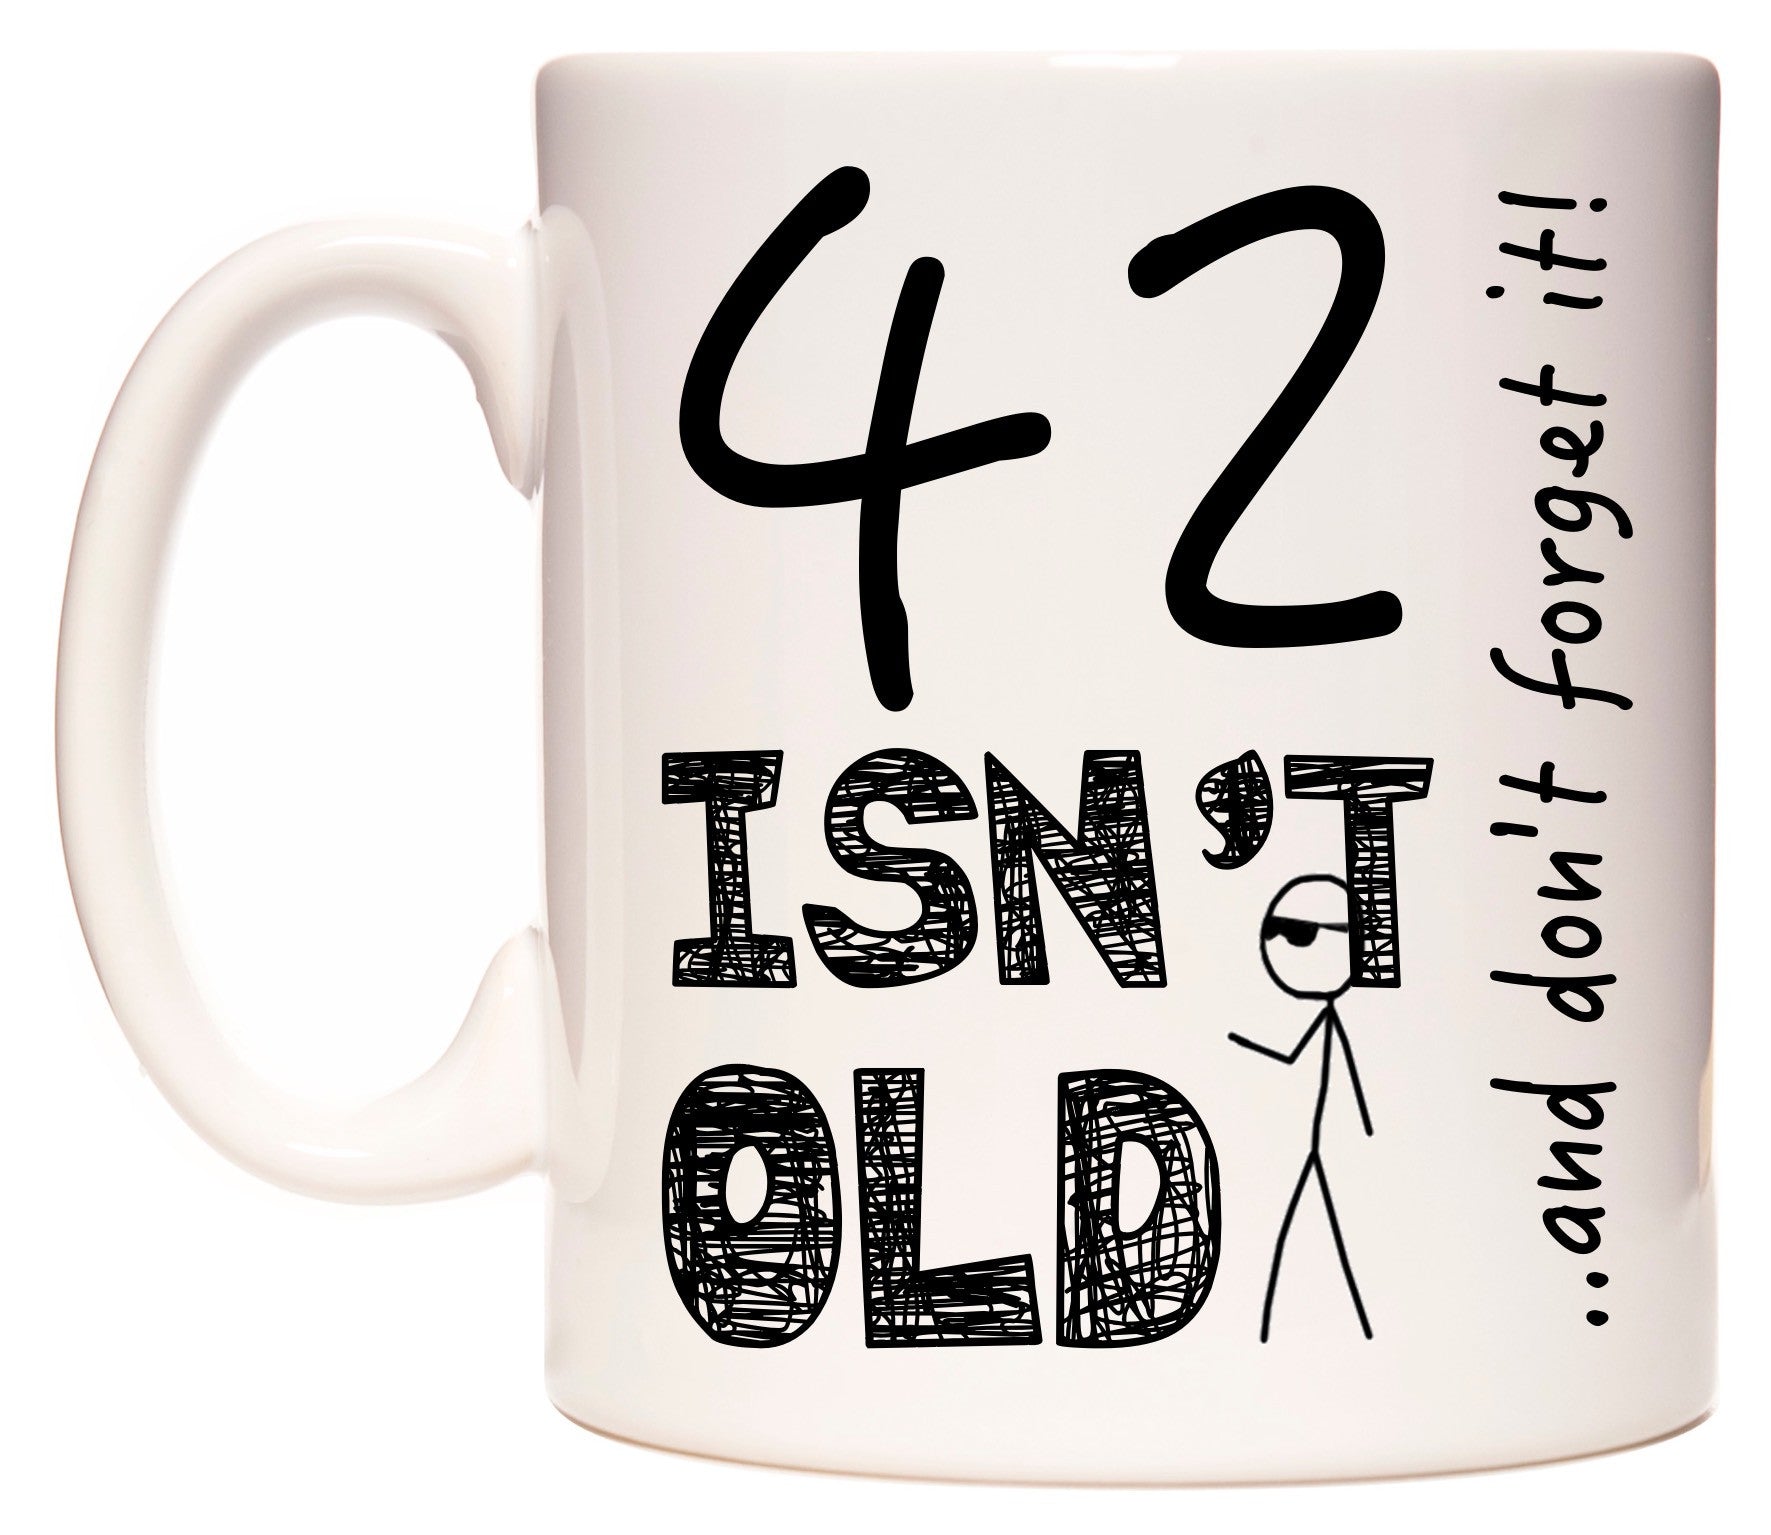 This mug features 42 Isn't Old